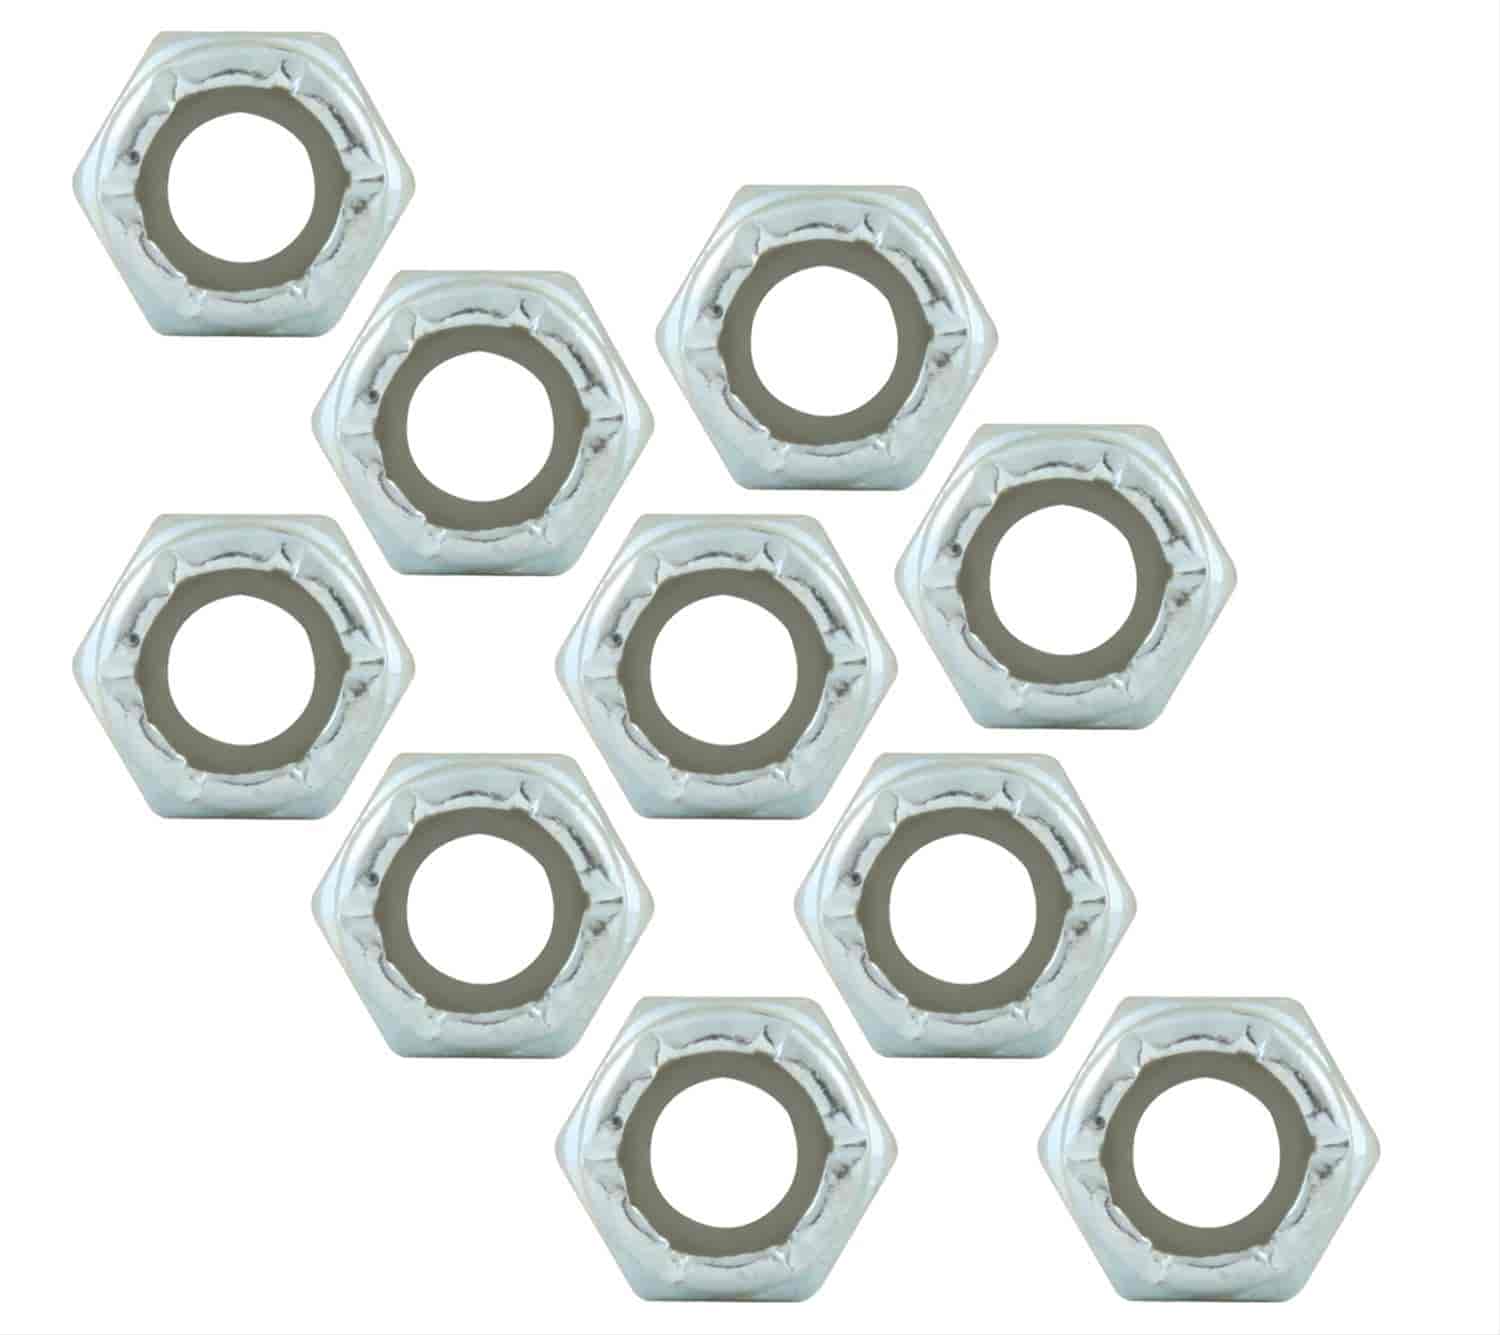 Fine Thread Hex Nuts Thin With Nylon Inserts 1/4"-28